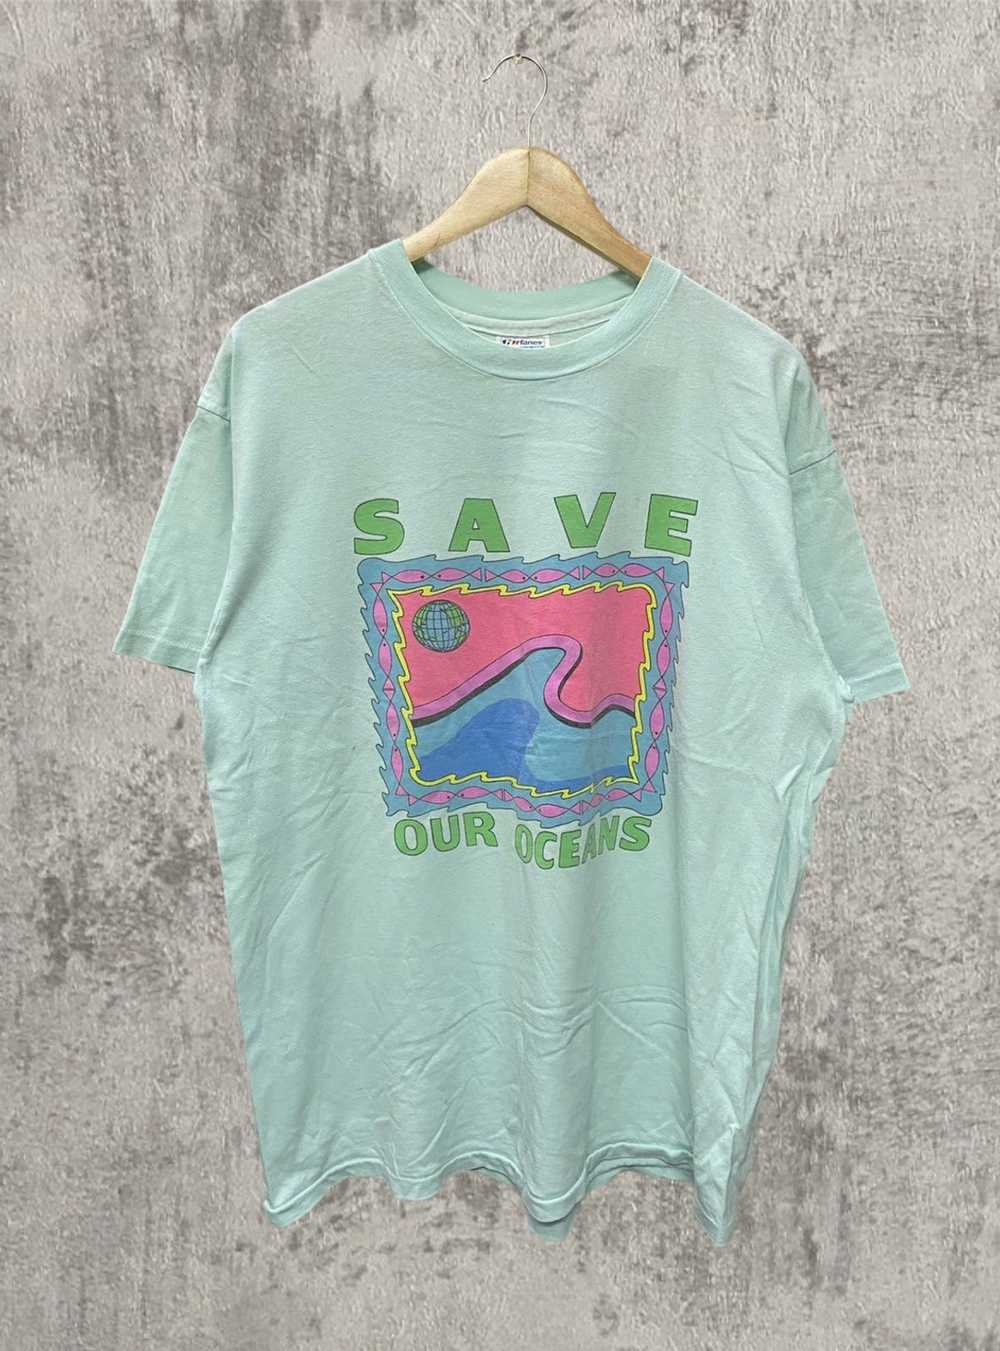 Vintage Vintage 90s Save Our Ocean T-shirt by HAN… - image 1